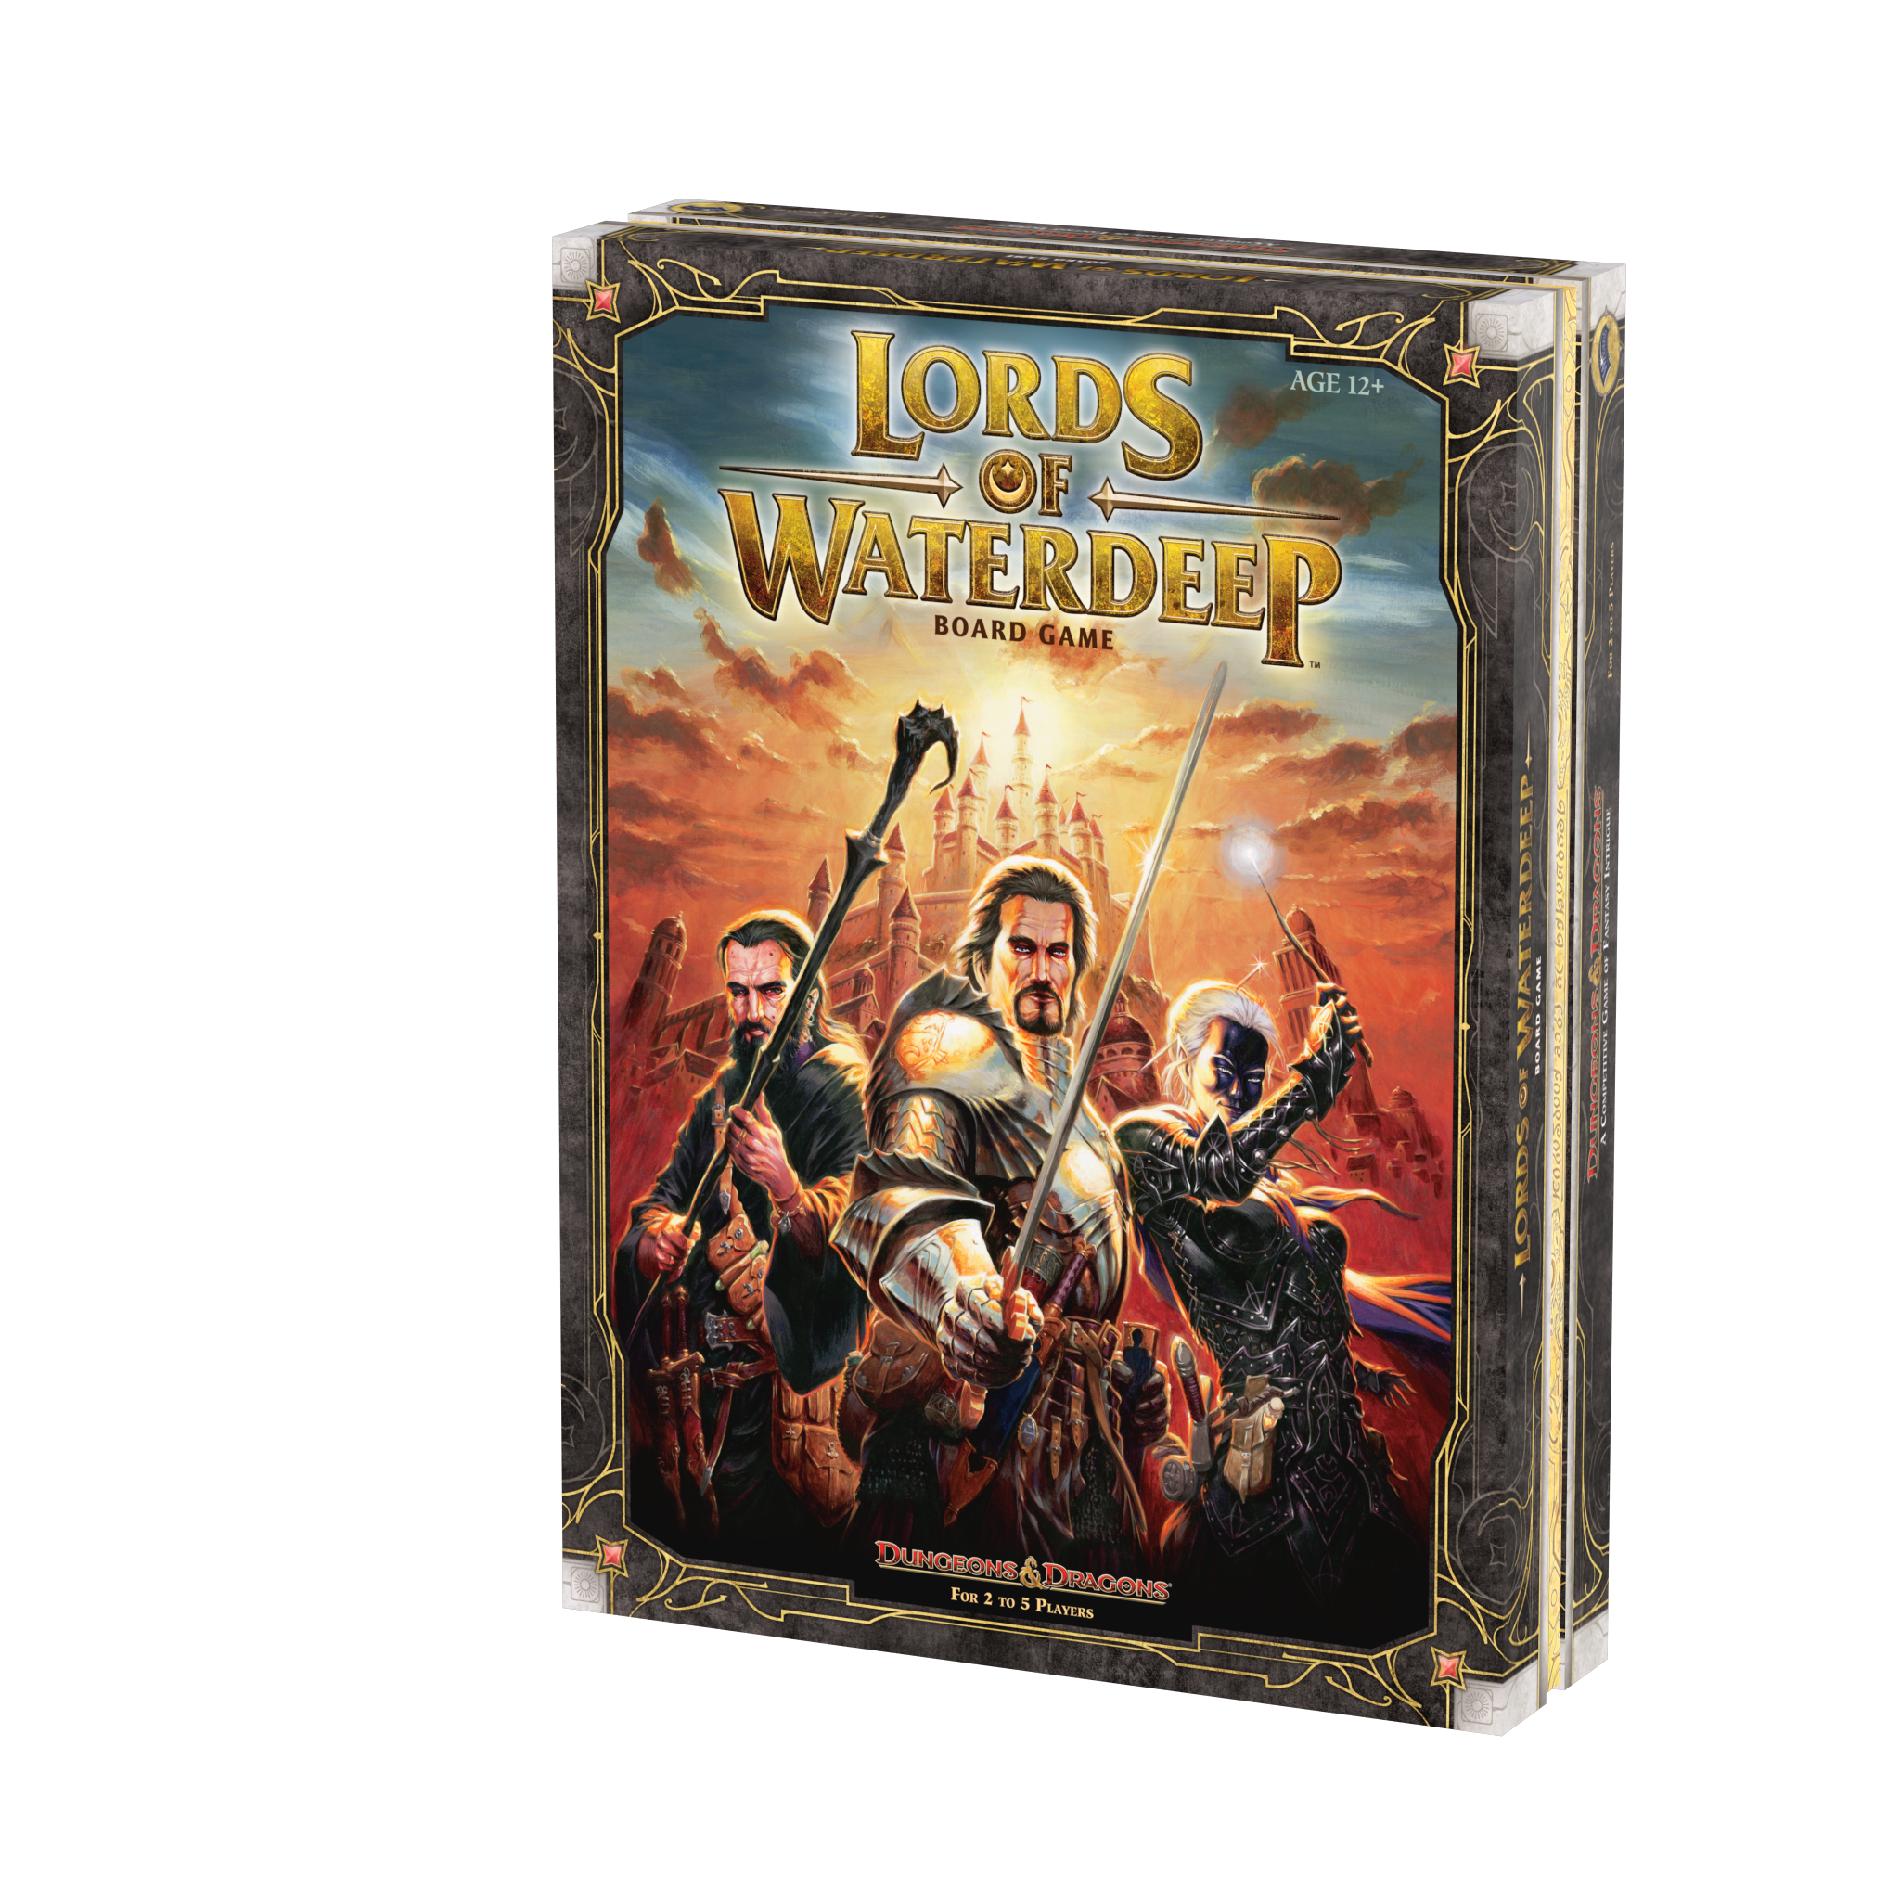 Dungeons & Dragons: Lords of Waterdeep Boardgame